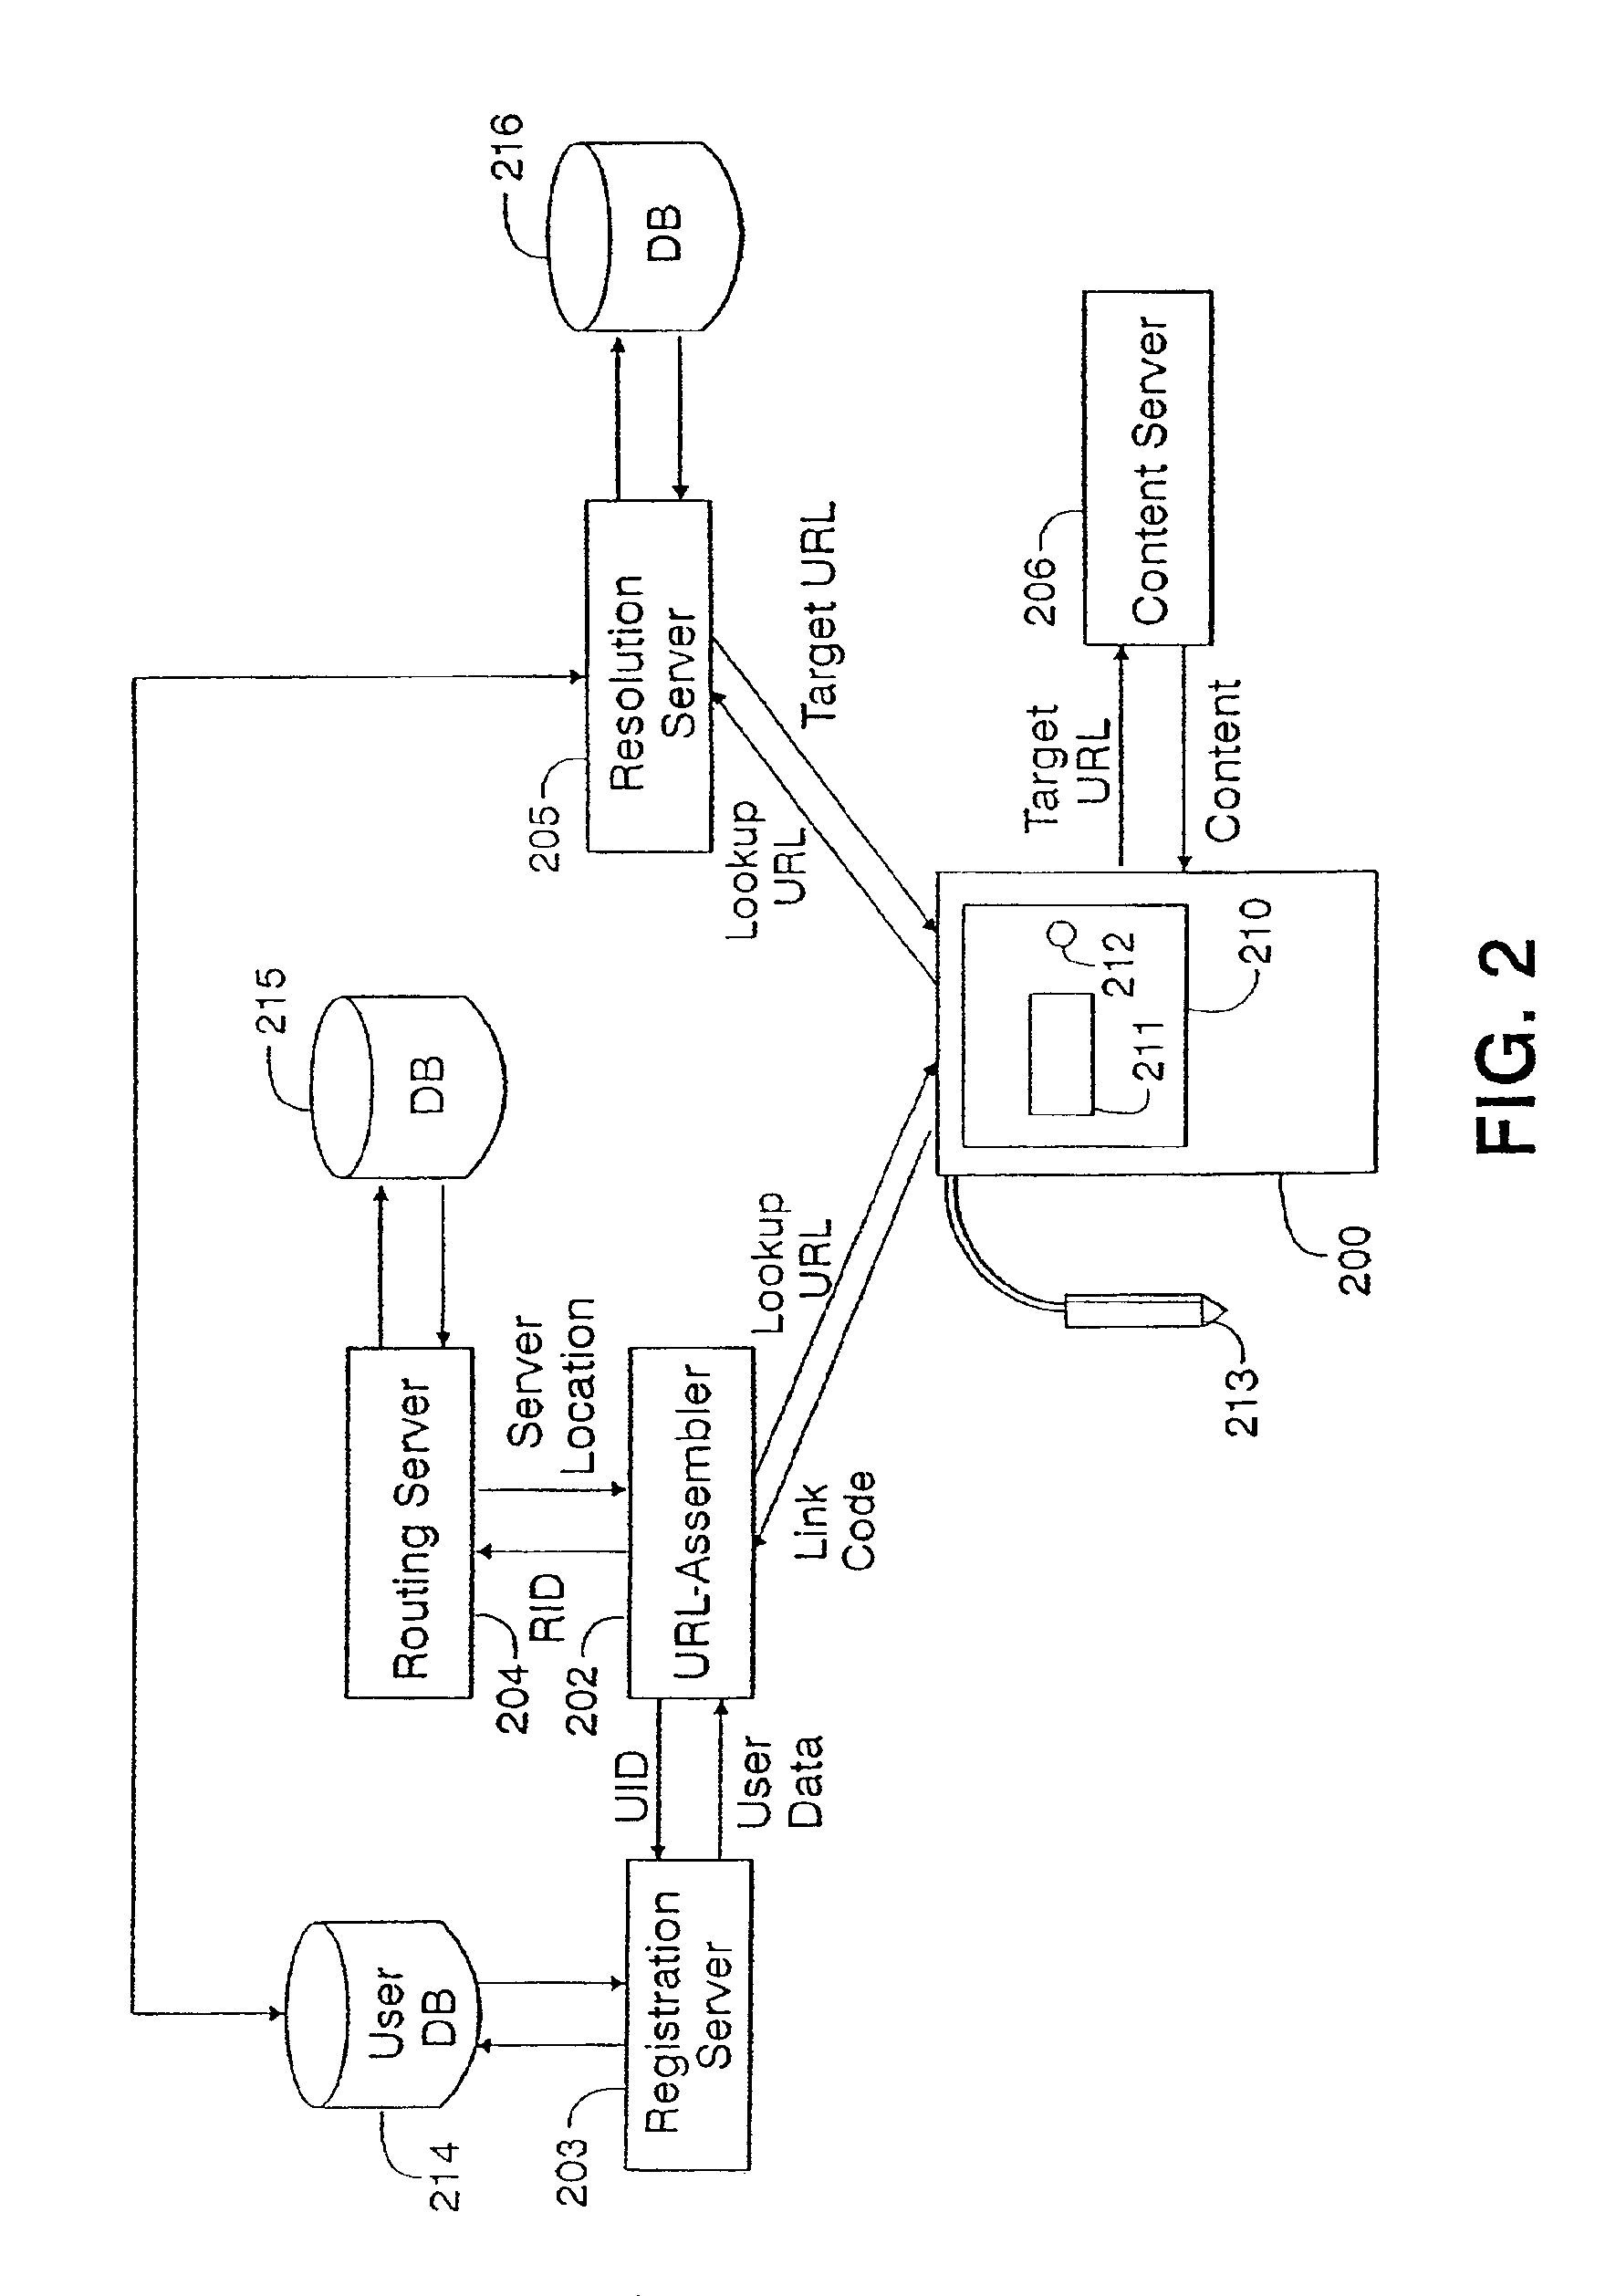 Method and system for simplified access to internet content on a wireless device